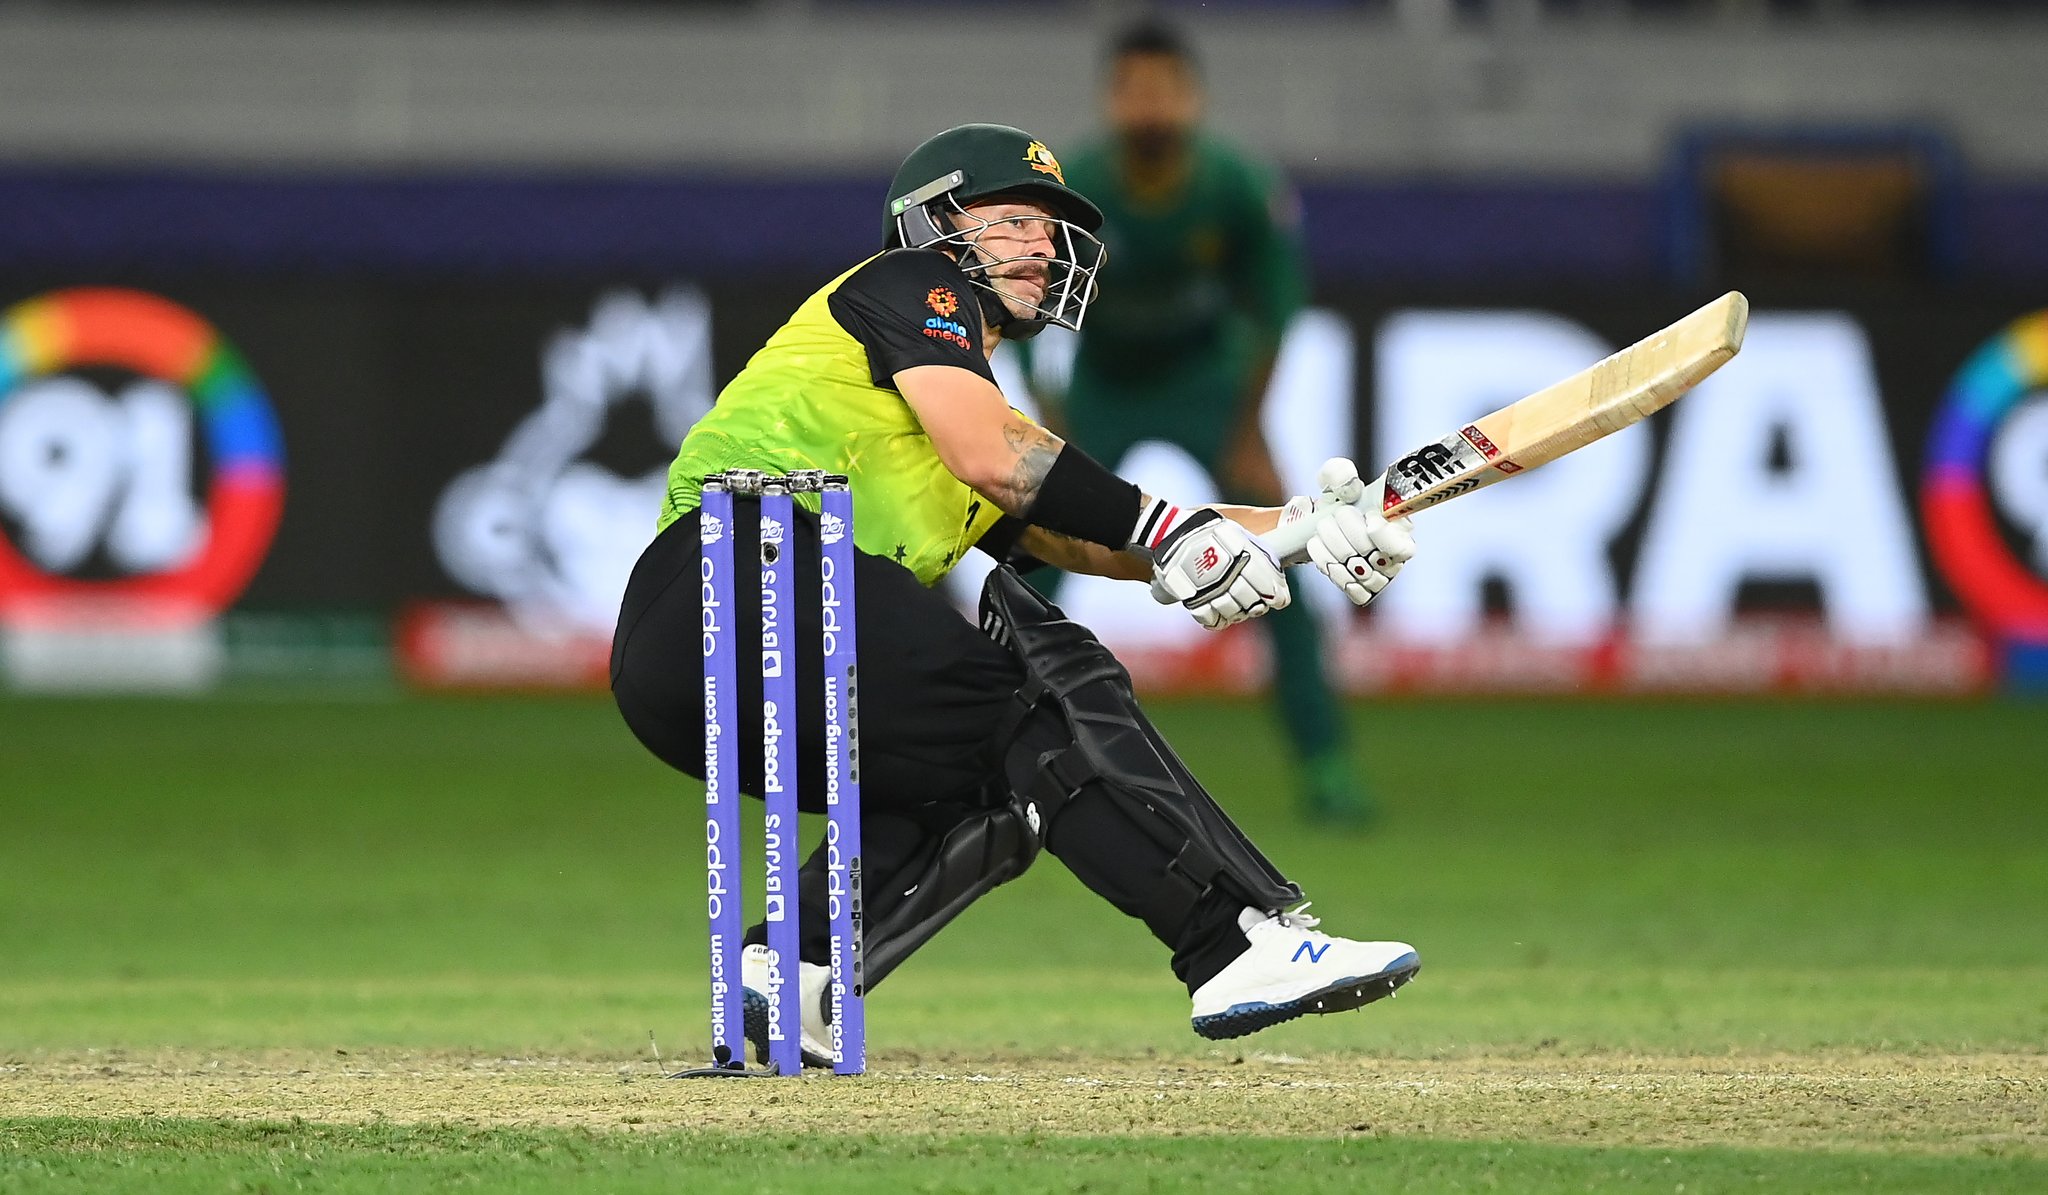 T20 World Cup | Thought it could be my last opportunity to represent Australia, says Matthew Wade after semi-final heroics